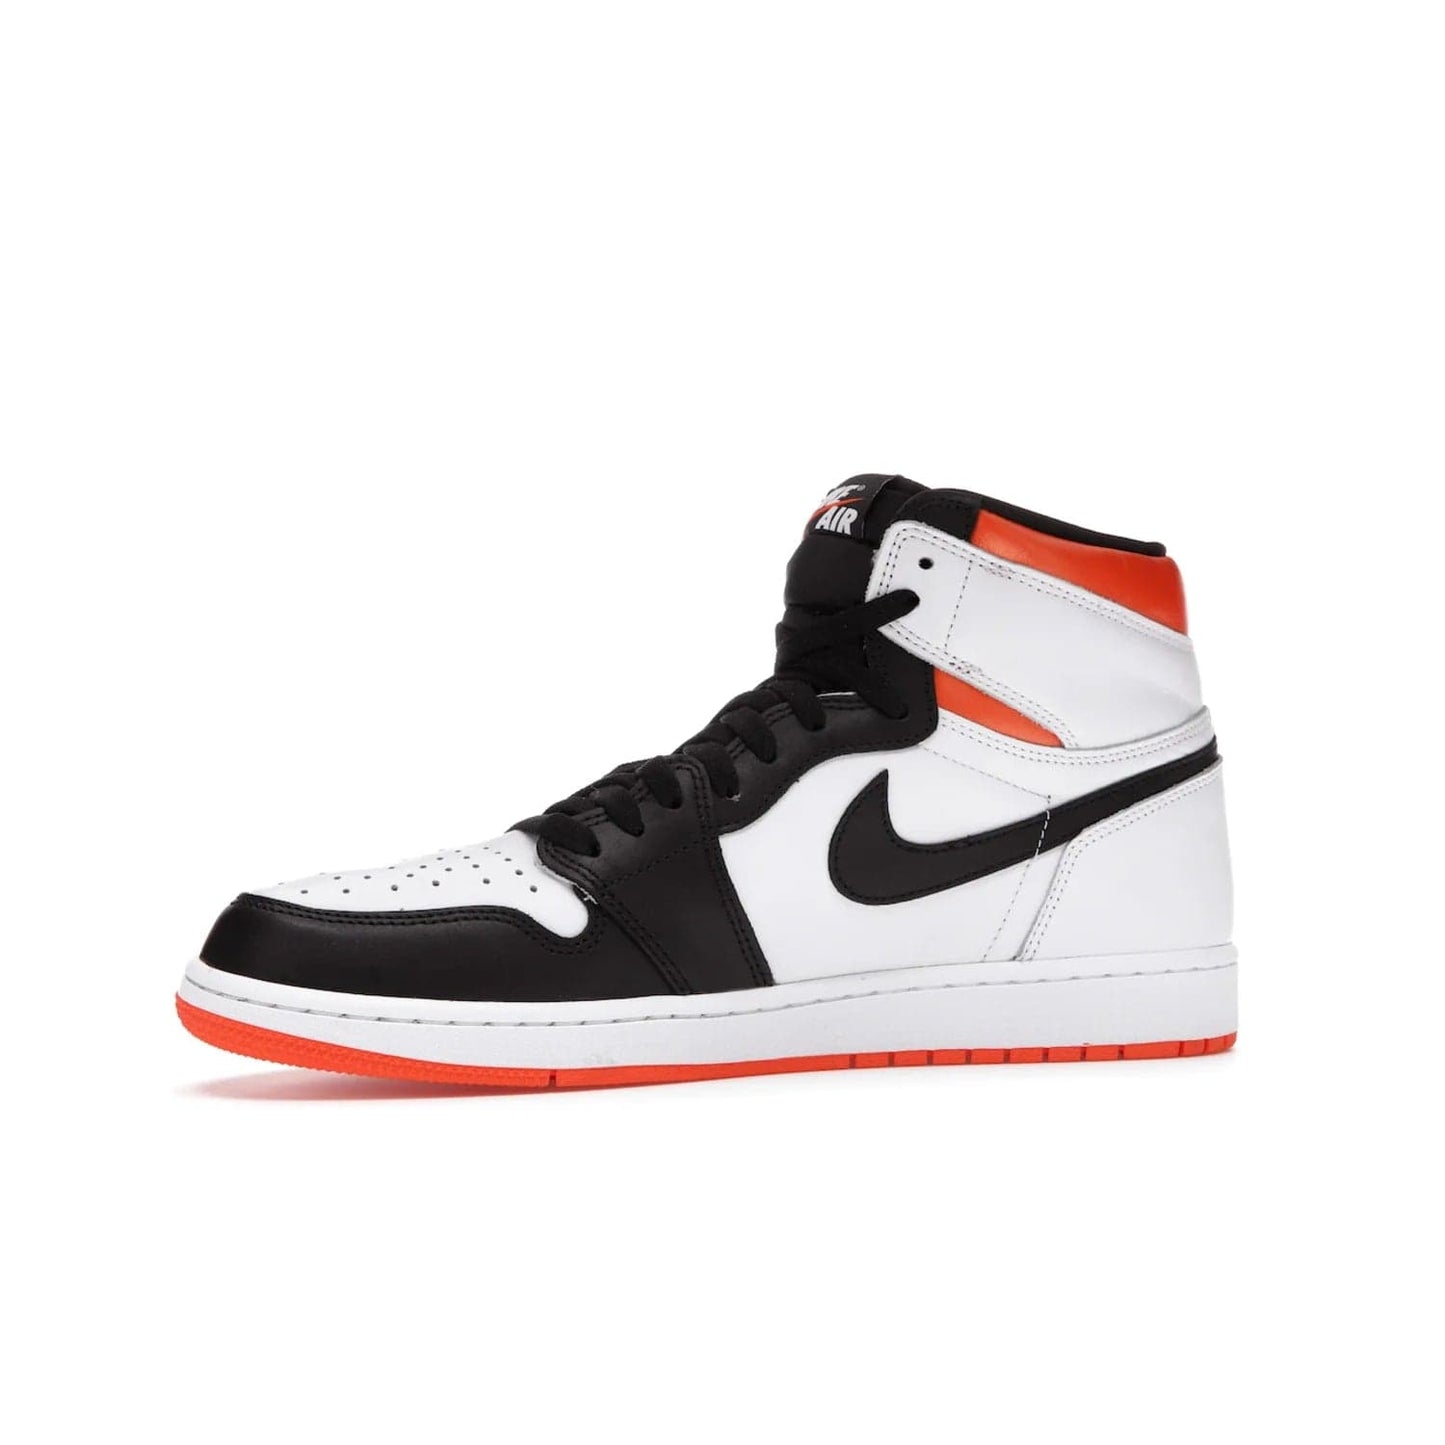 Jordan 1 Retro High Electro Orange - Image 17 - Only at www.BallersClubKickz.com - This Air Jordan 1 Retro High Electro Orange features a white leather upper with black overlays and vibrant Hyper Orange ankle wrap. Turn heads with this iconic design of woven tongue label and sole. Get yours today and add some serious style to your rotation.